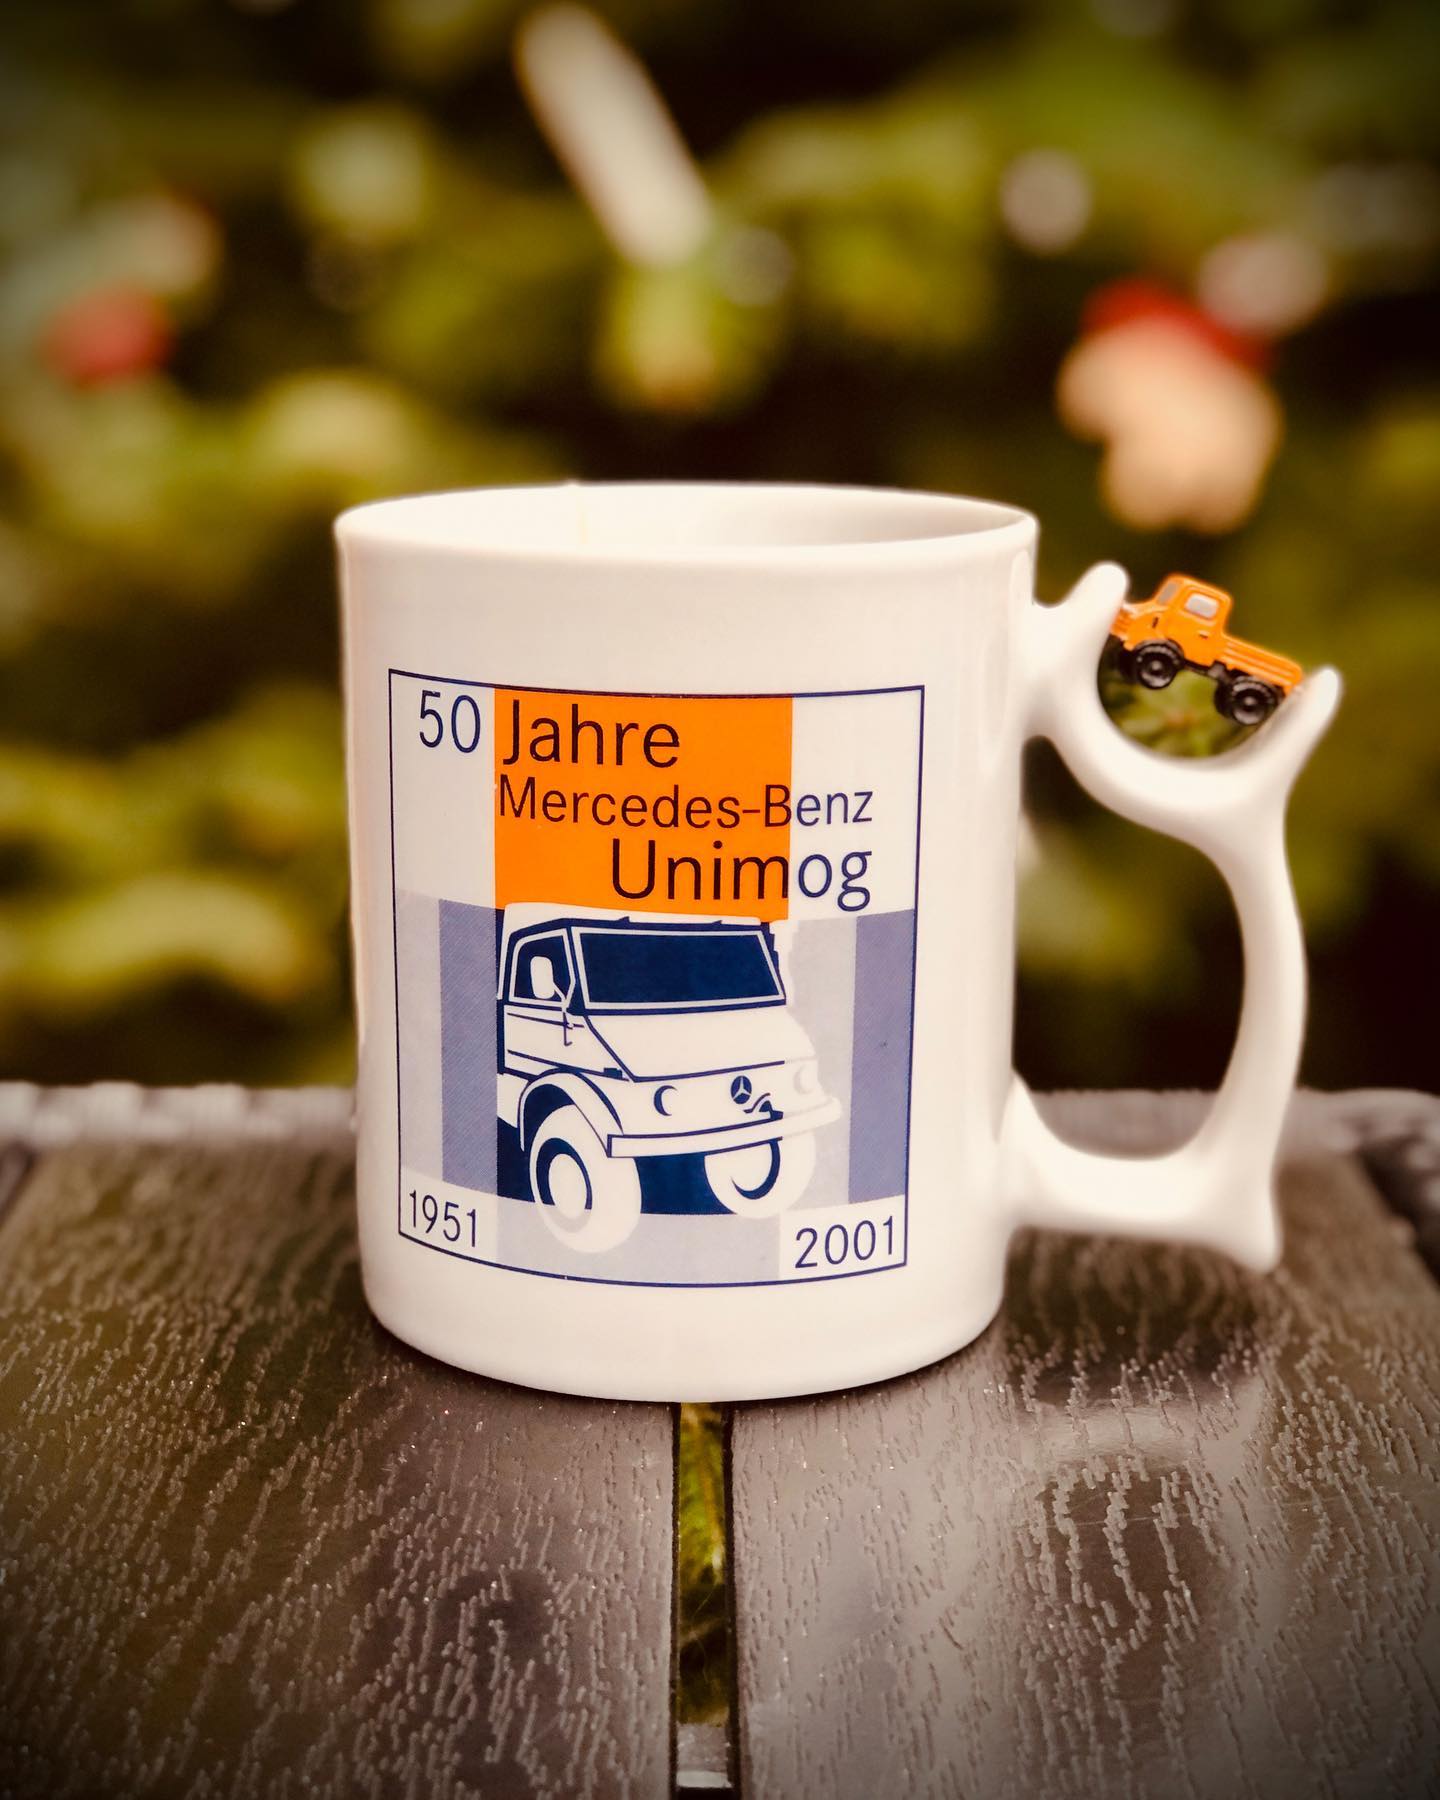 One of my favourite cups!
Perfect for a break with tea on Christmas Day !
Merry Christmas to y’all!

#mogschrauber #webergrill #weber #webergrills #weberkettleclub #tvwbb #unimog #unimogcommunity #unimoglife